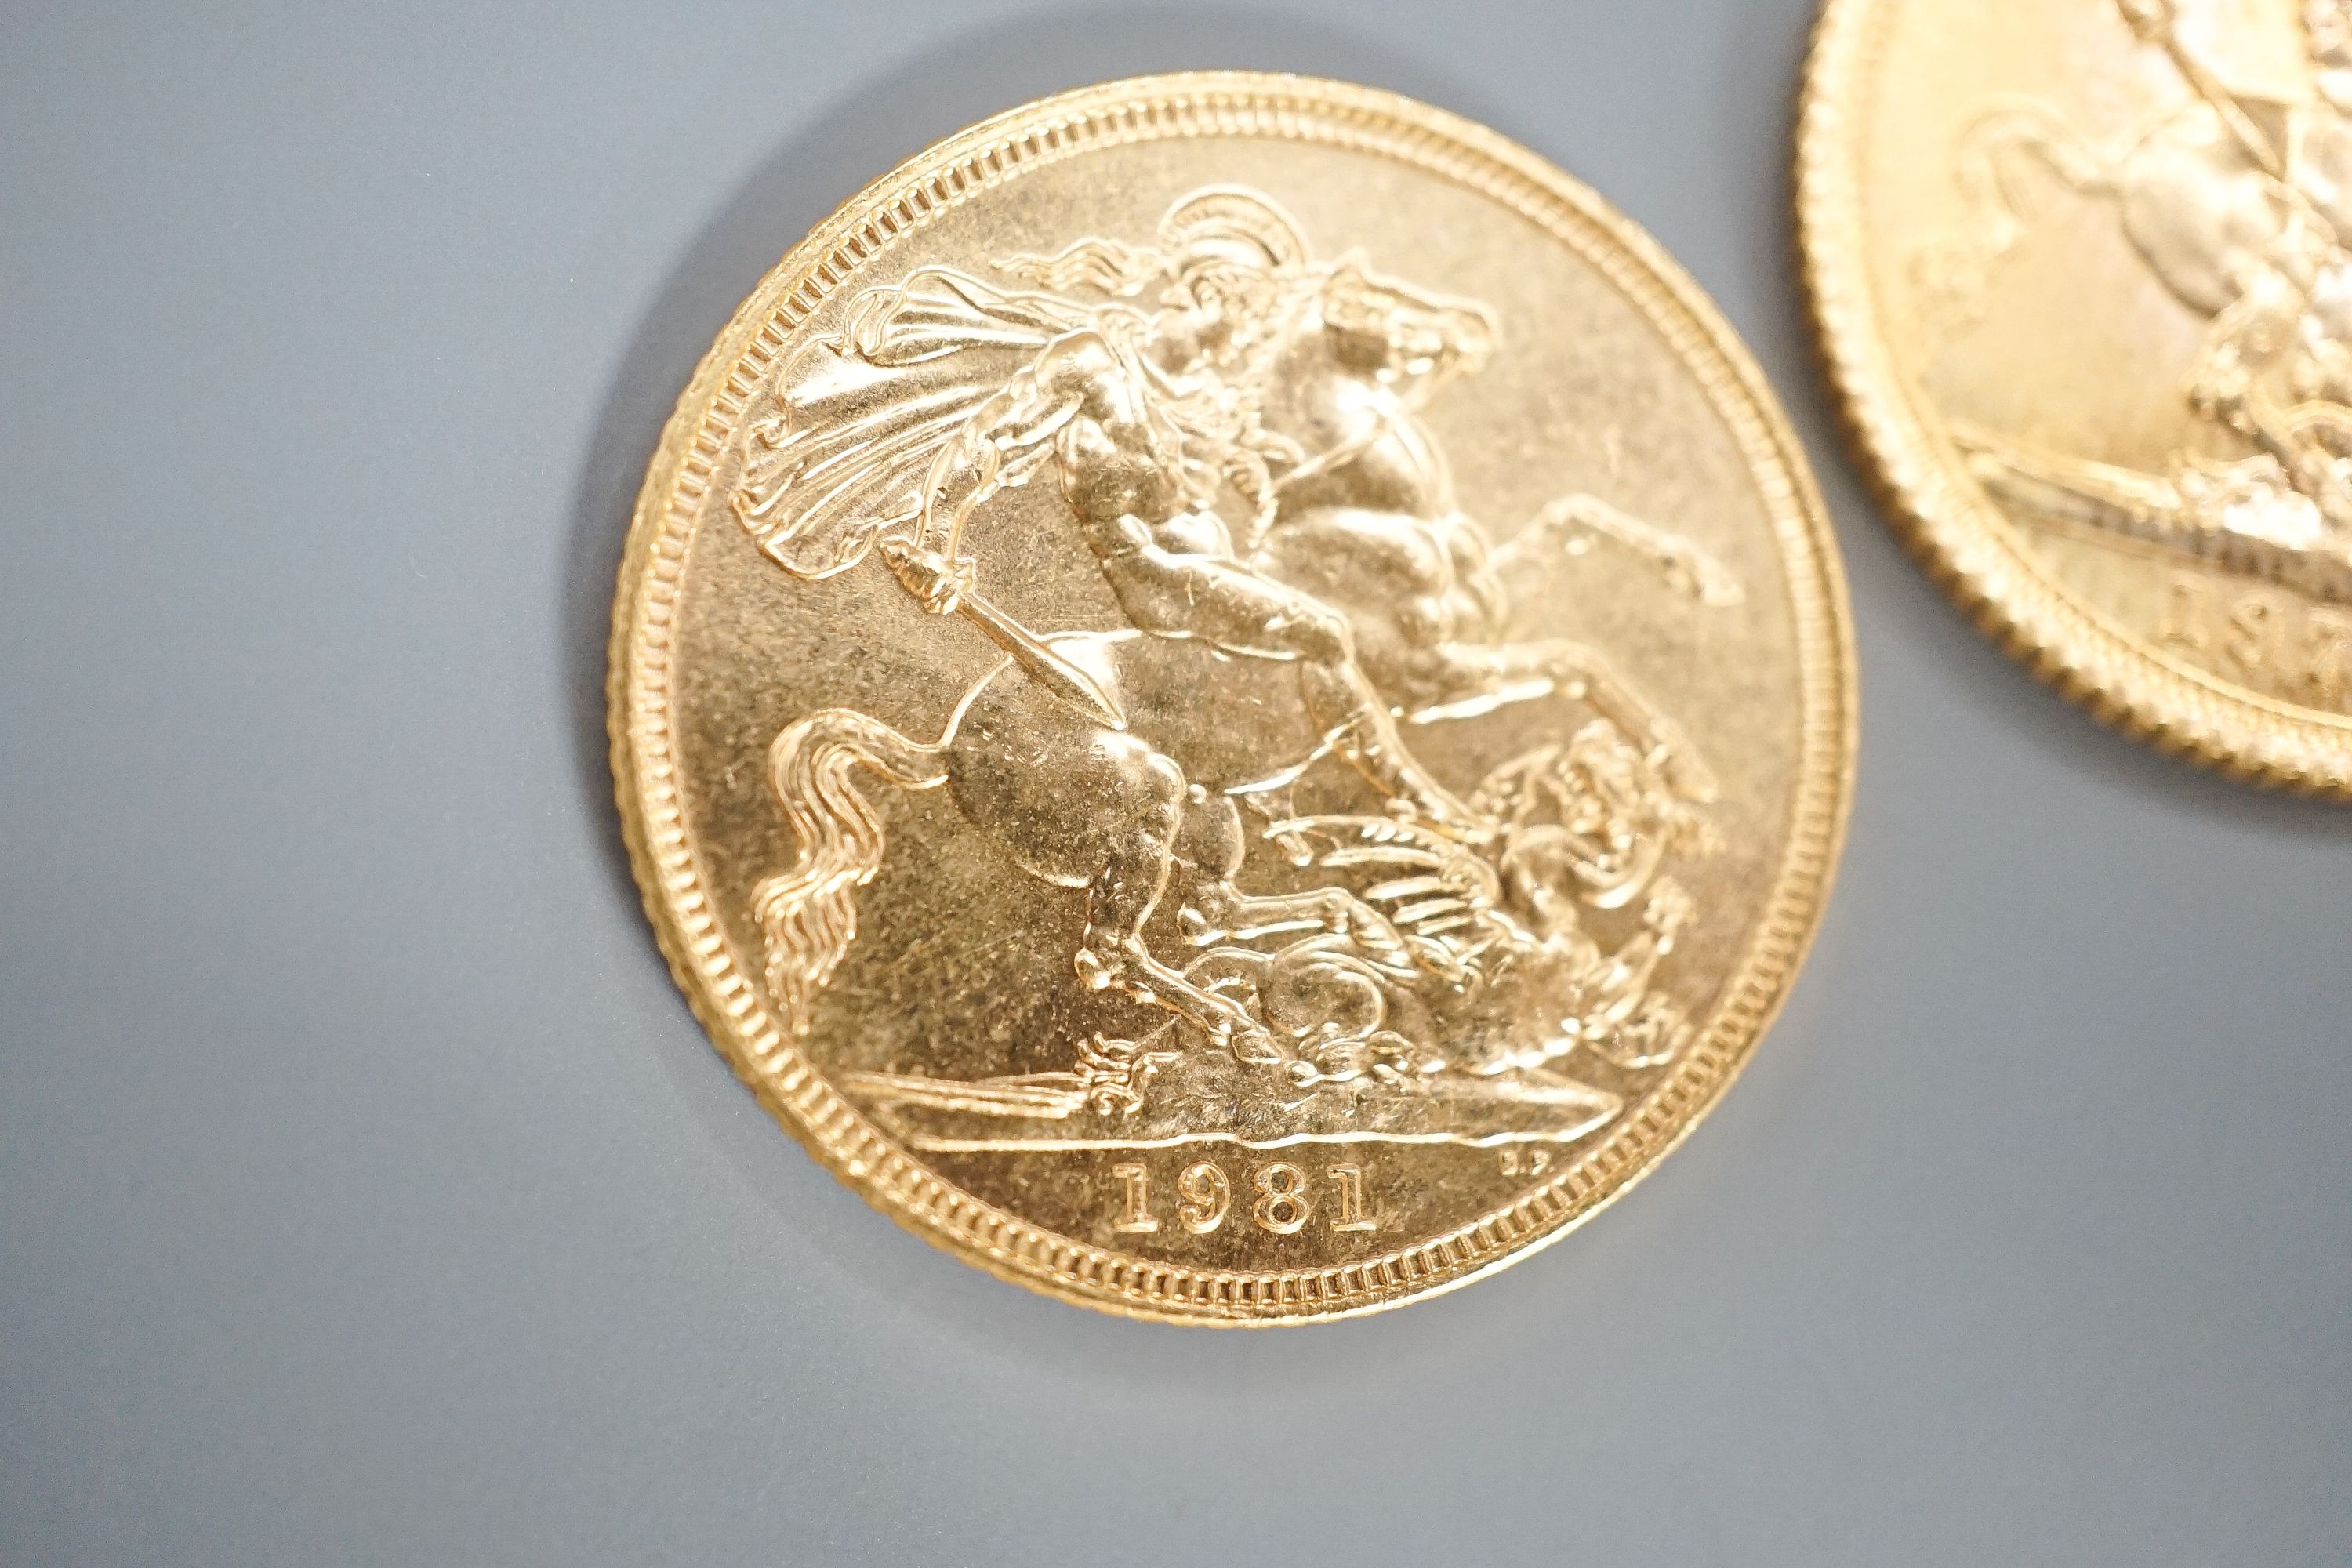 Two modern gold sovereigns, 1974 & 1981.